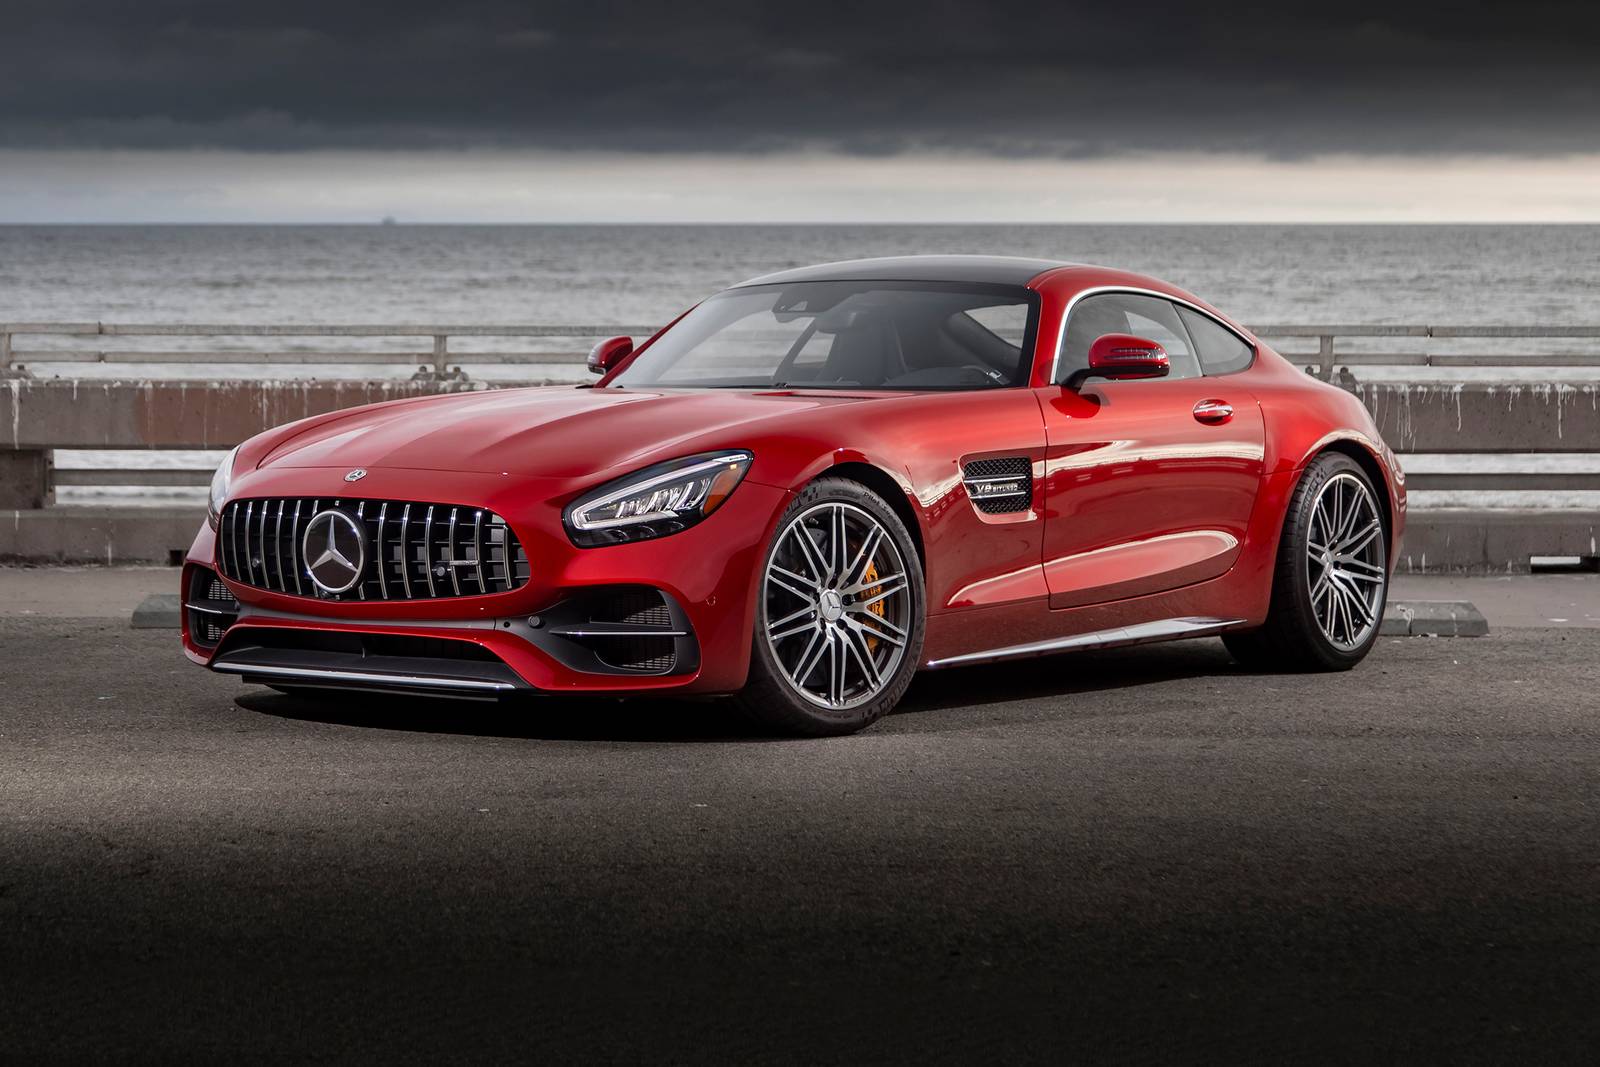 Used 2020 Mercedes-Benz AMG GT Coupe Review | Edmunds